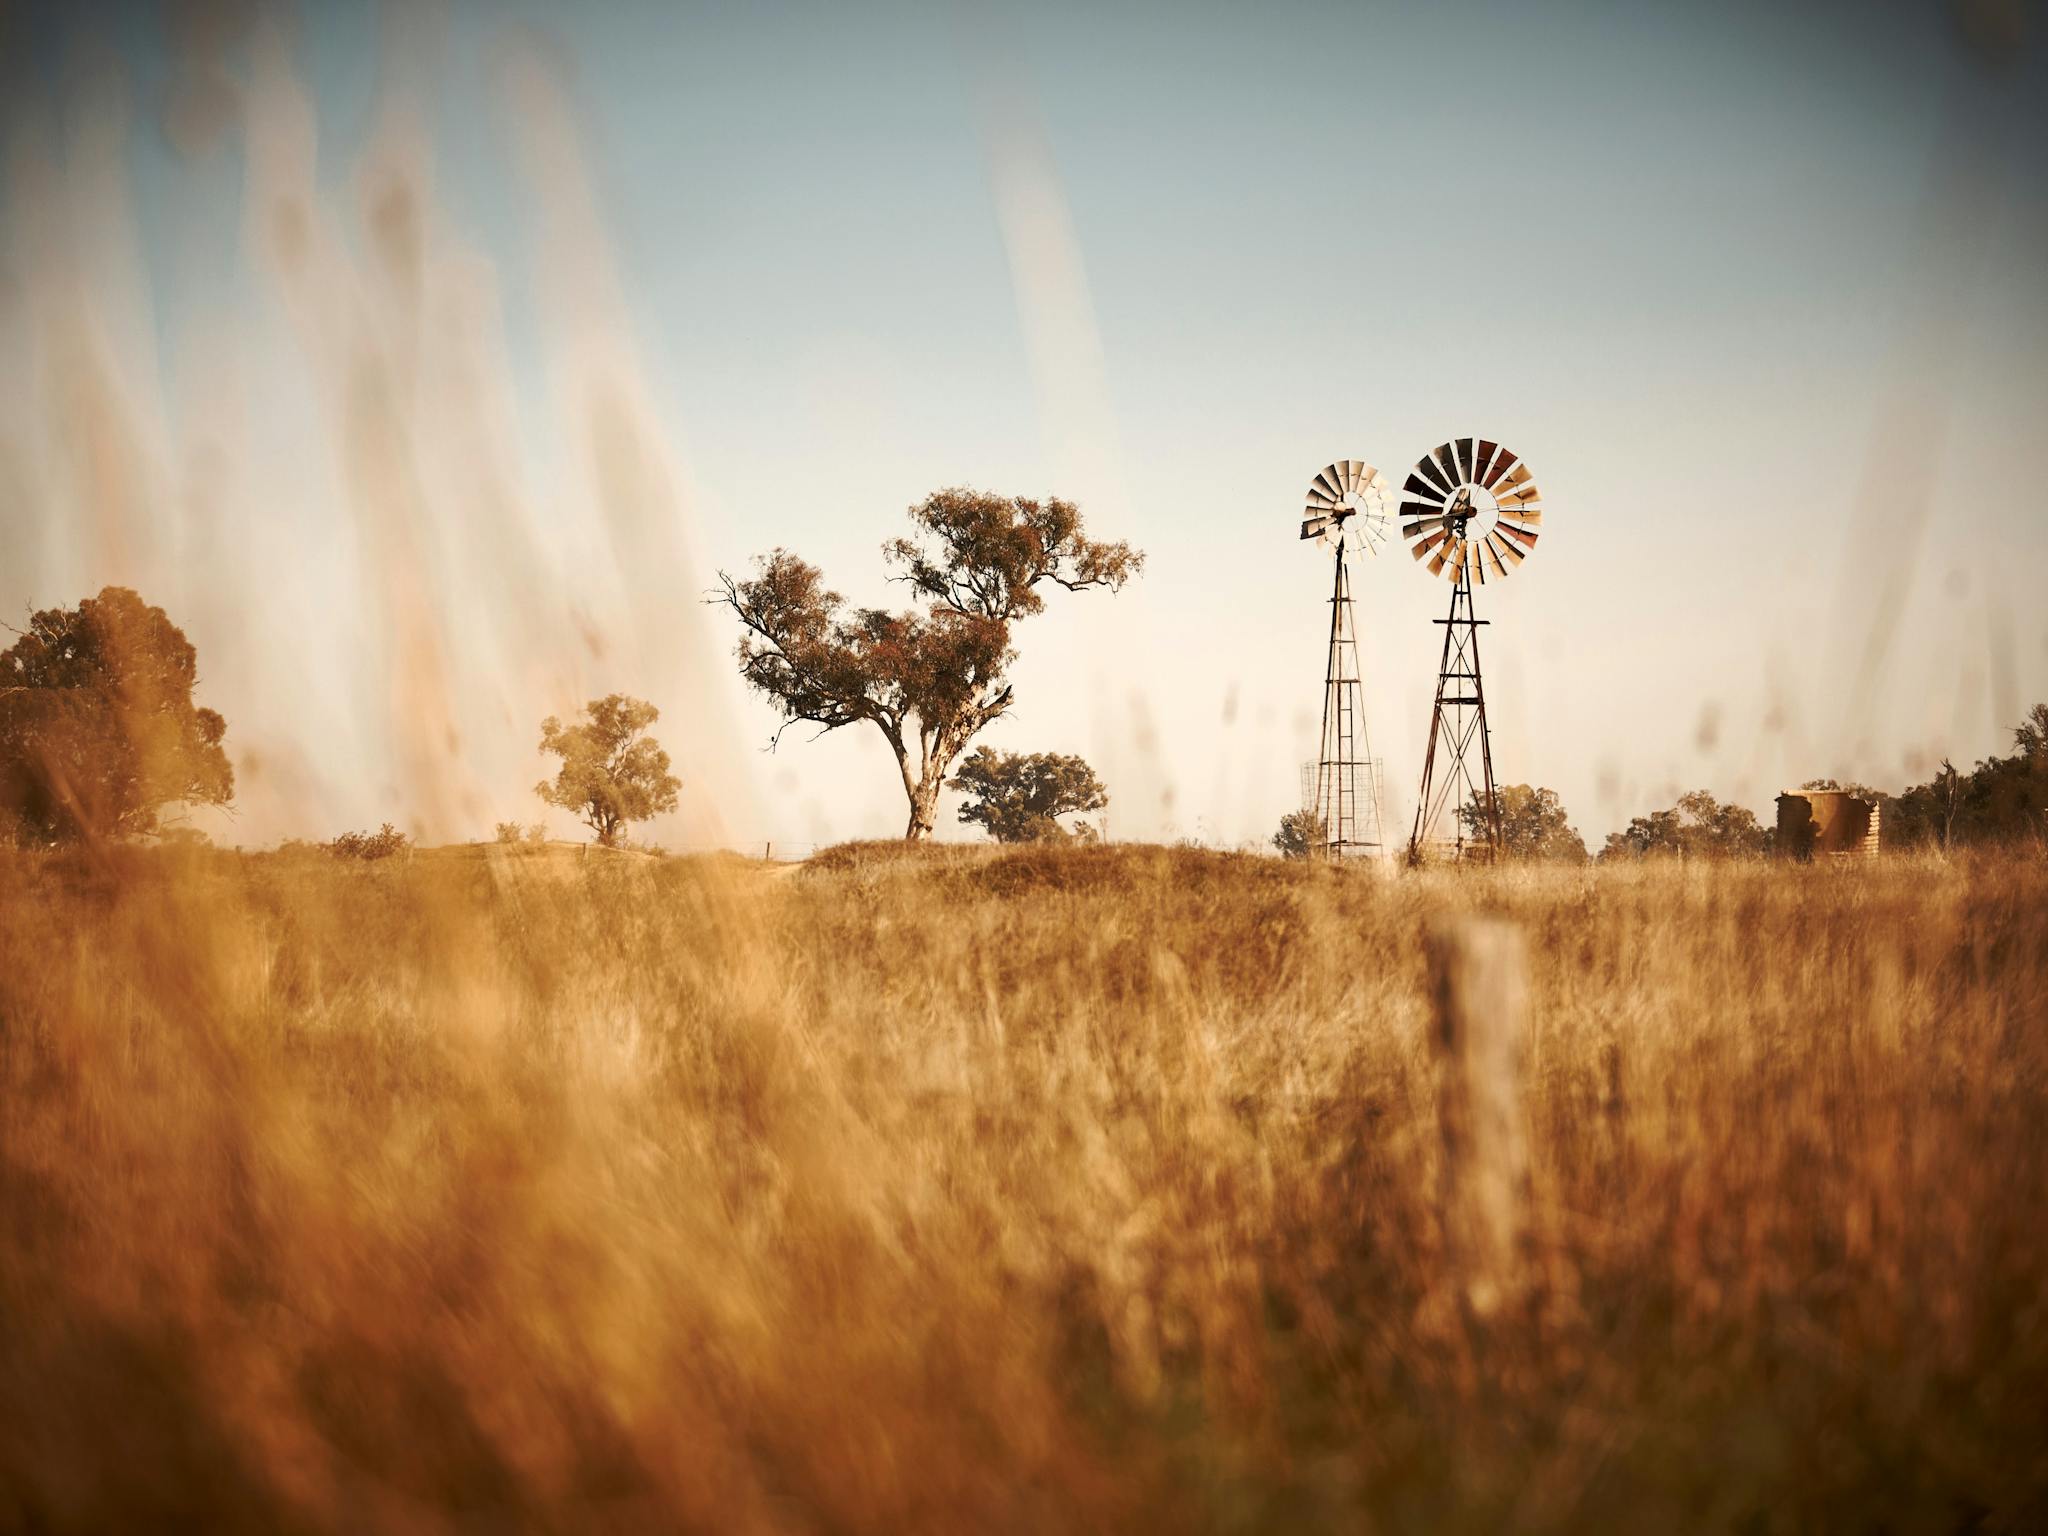 brown grasses, trees and windmills in the background